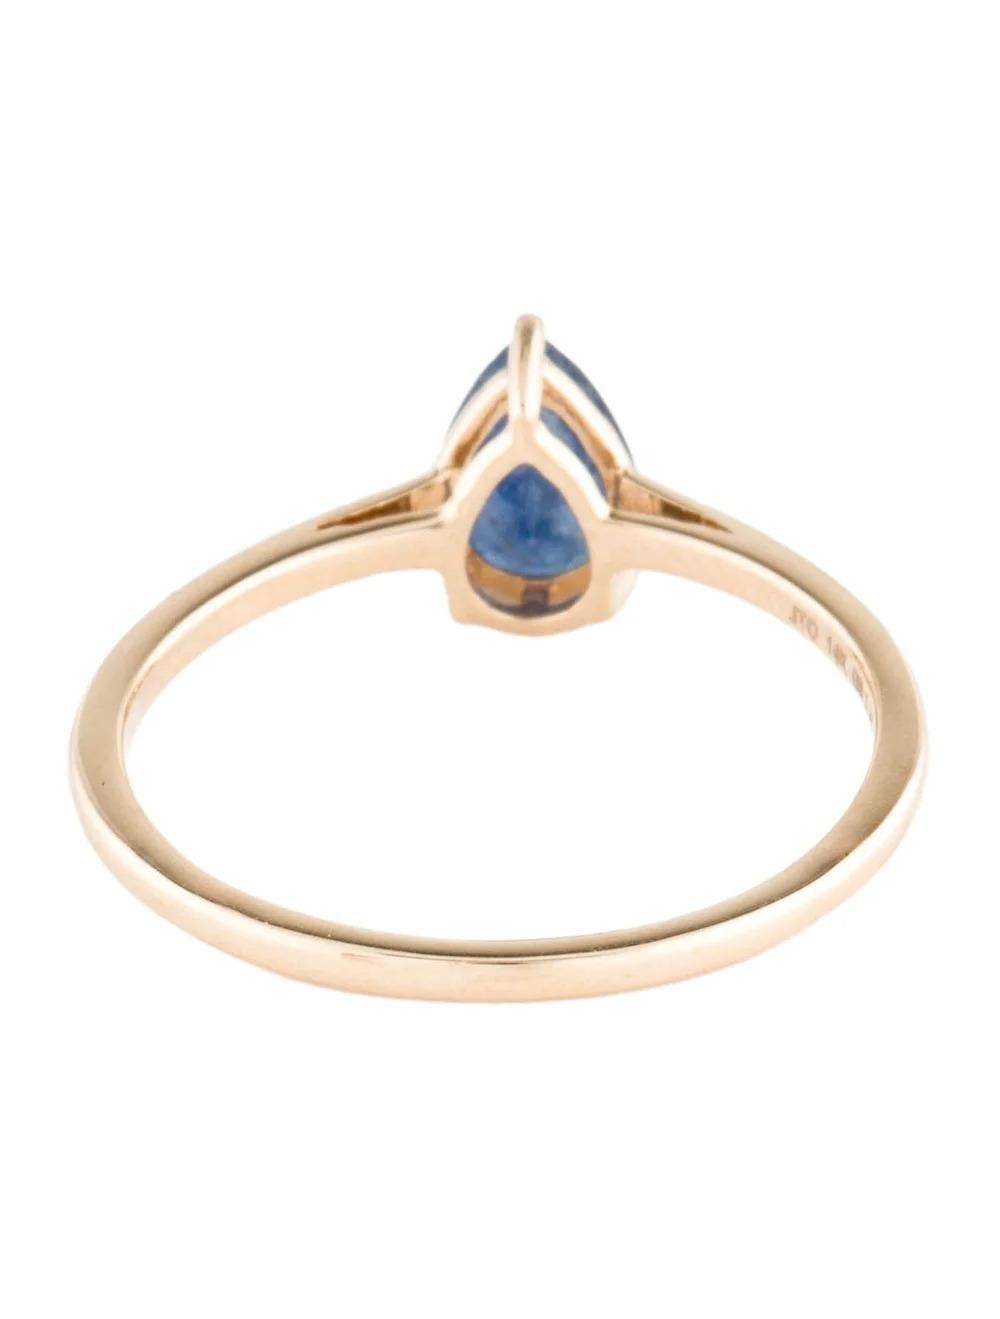 14K Sapphire Cocktail Ring, Size 6.75: Timeless Blue Gemstone, Statement Jewelry In New Condition For Sale In Holtsville, NY